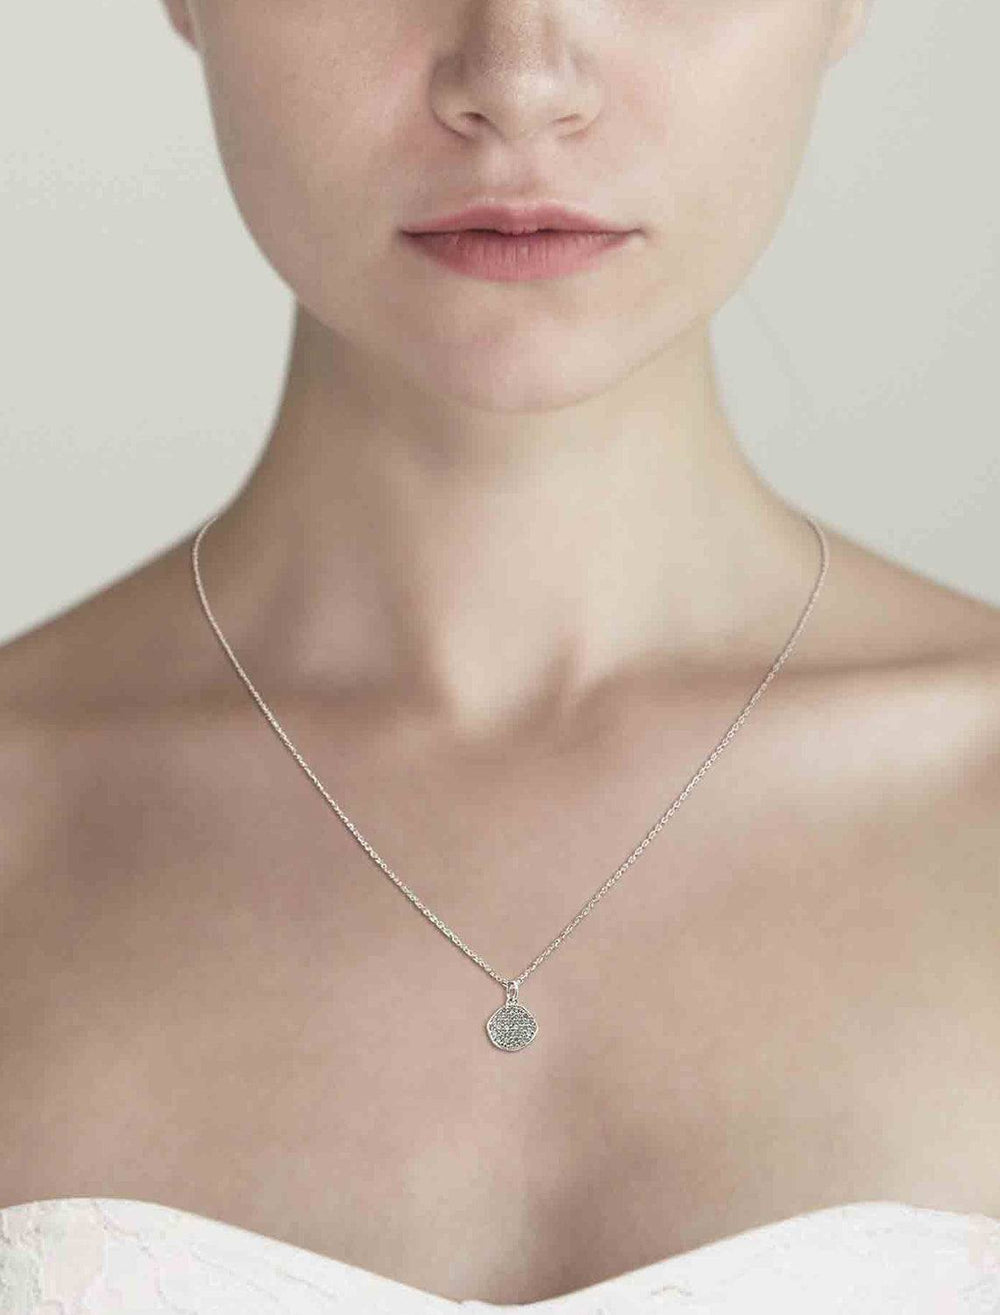 Model wearing Tai's simple chain necklace with cz disc.